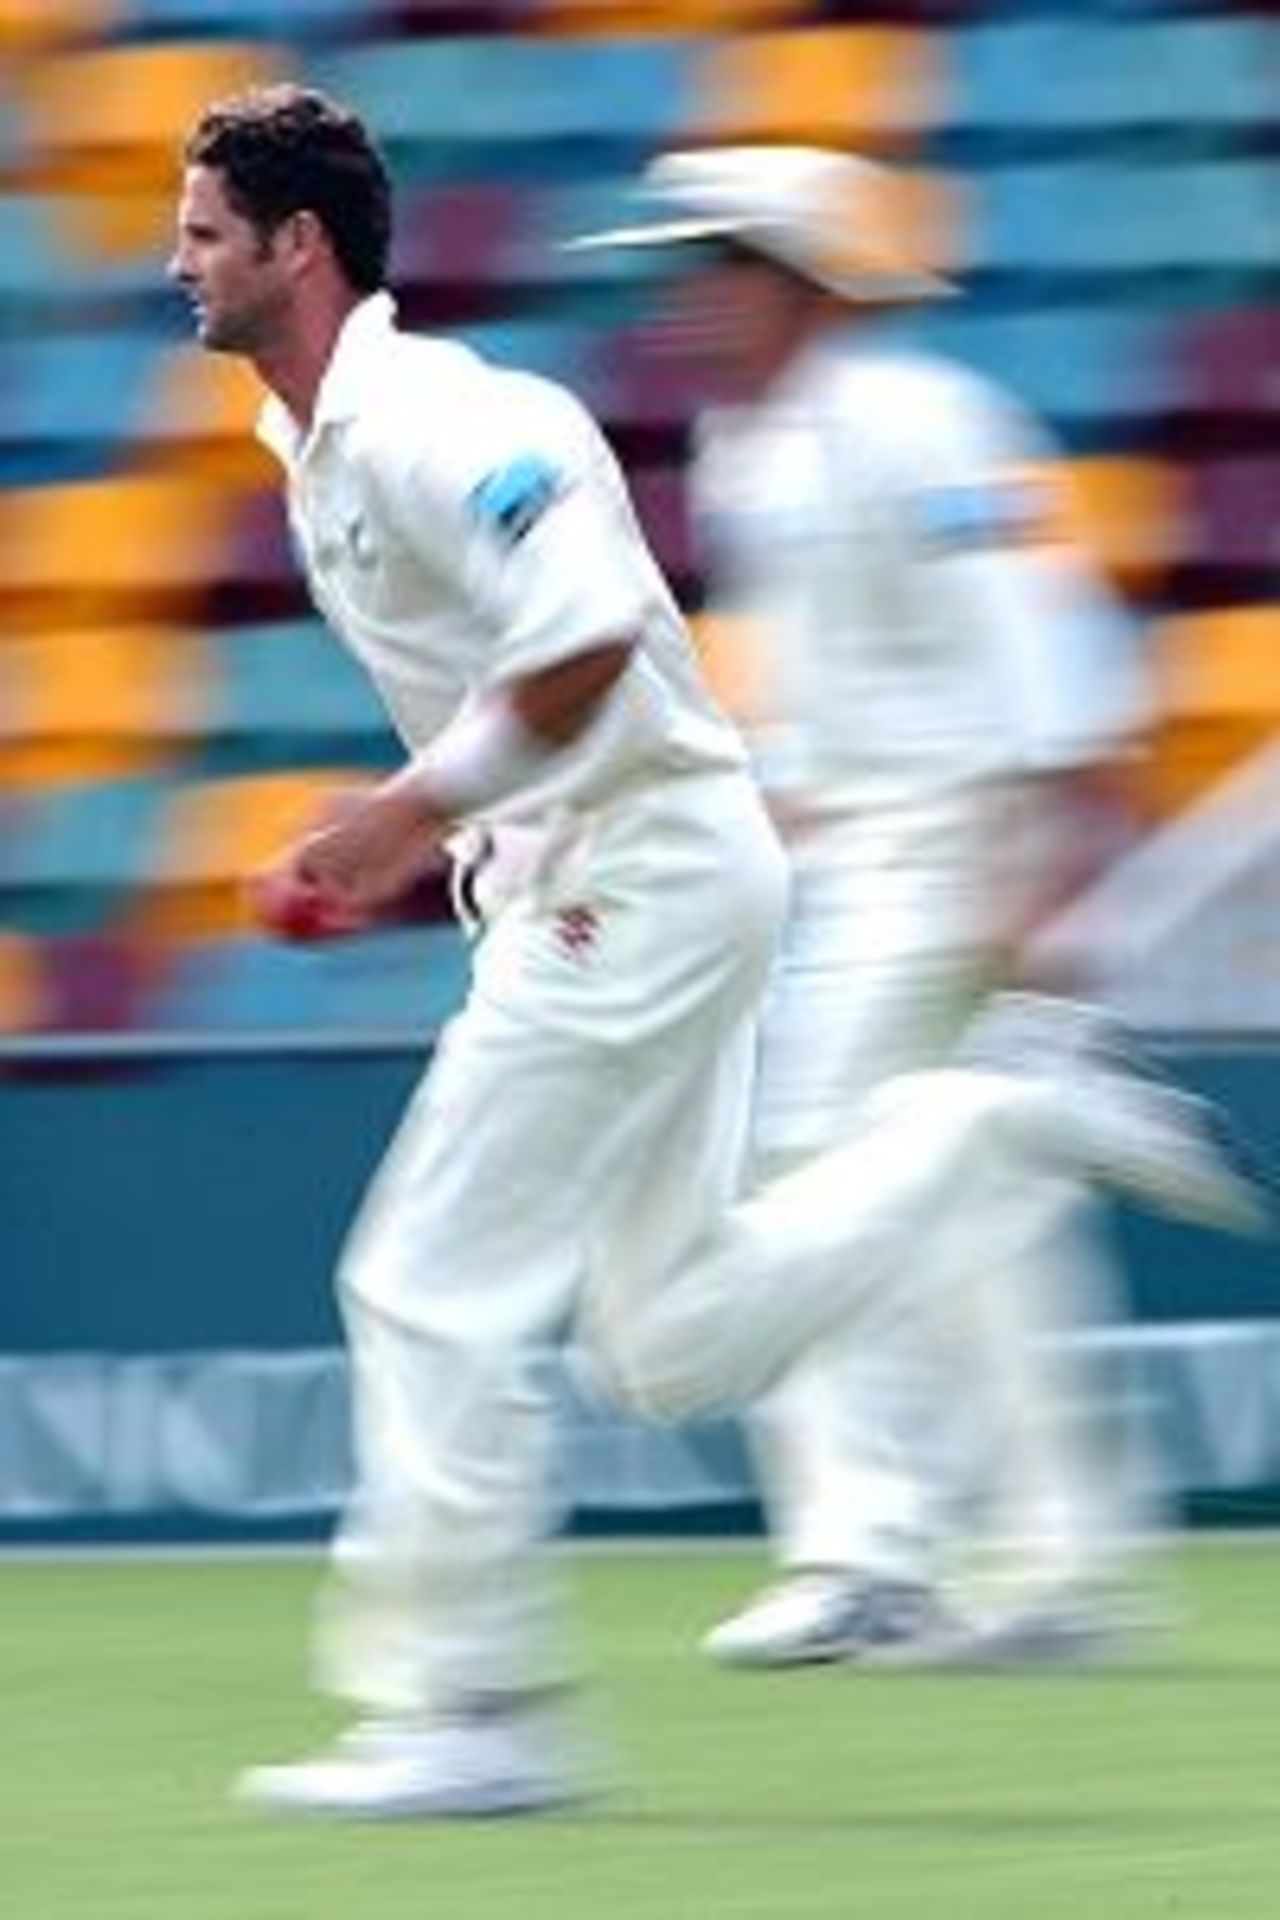 4 Nov 2001: Chris Cairns of New Zealand in action bowling against Queensland during the New Zealand versus Queensland cricket match played at the Gabba in Brisbane, Australia. The match is part of the New Zealand team's tour of Australia.